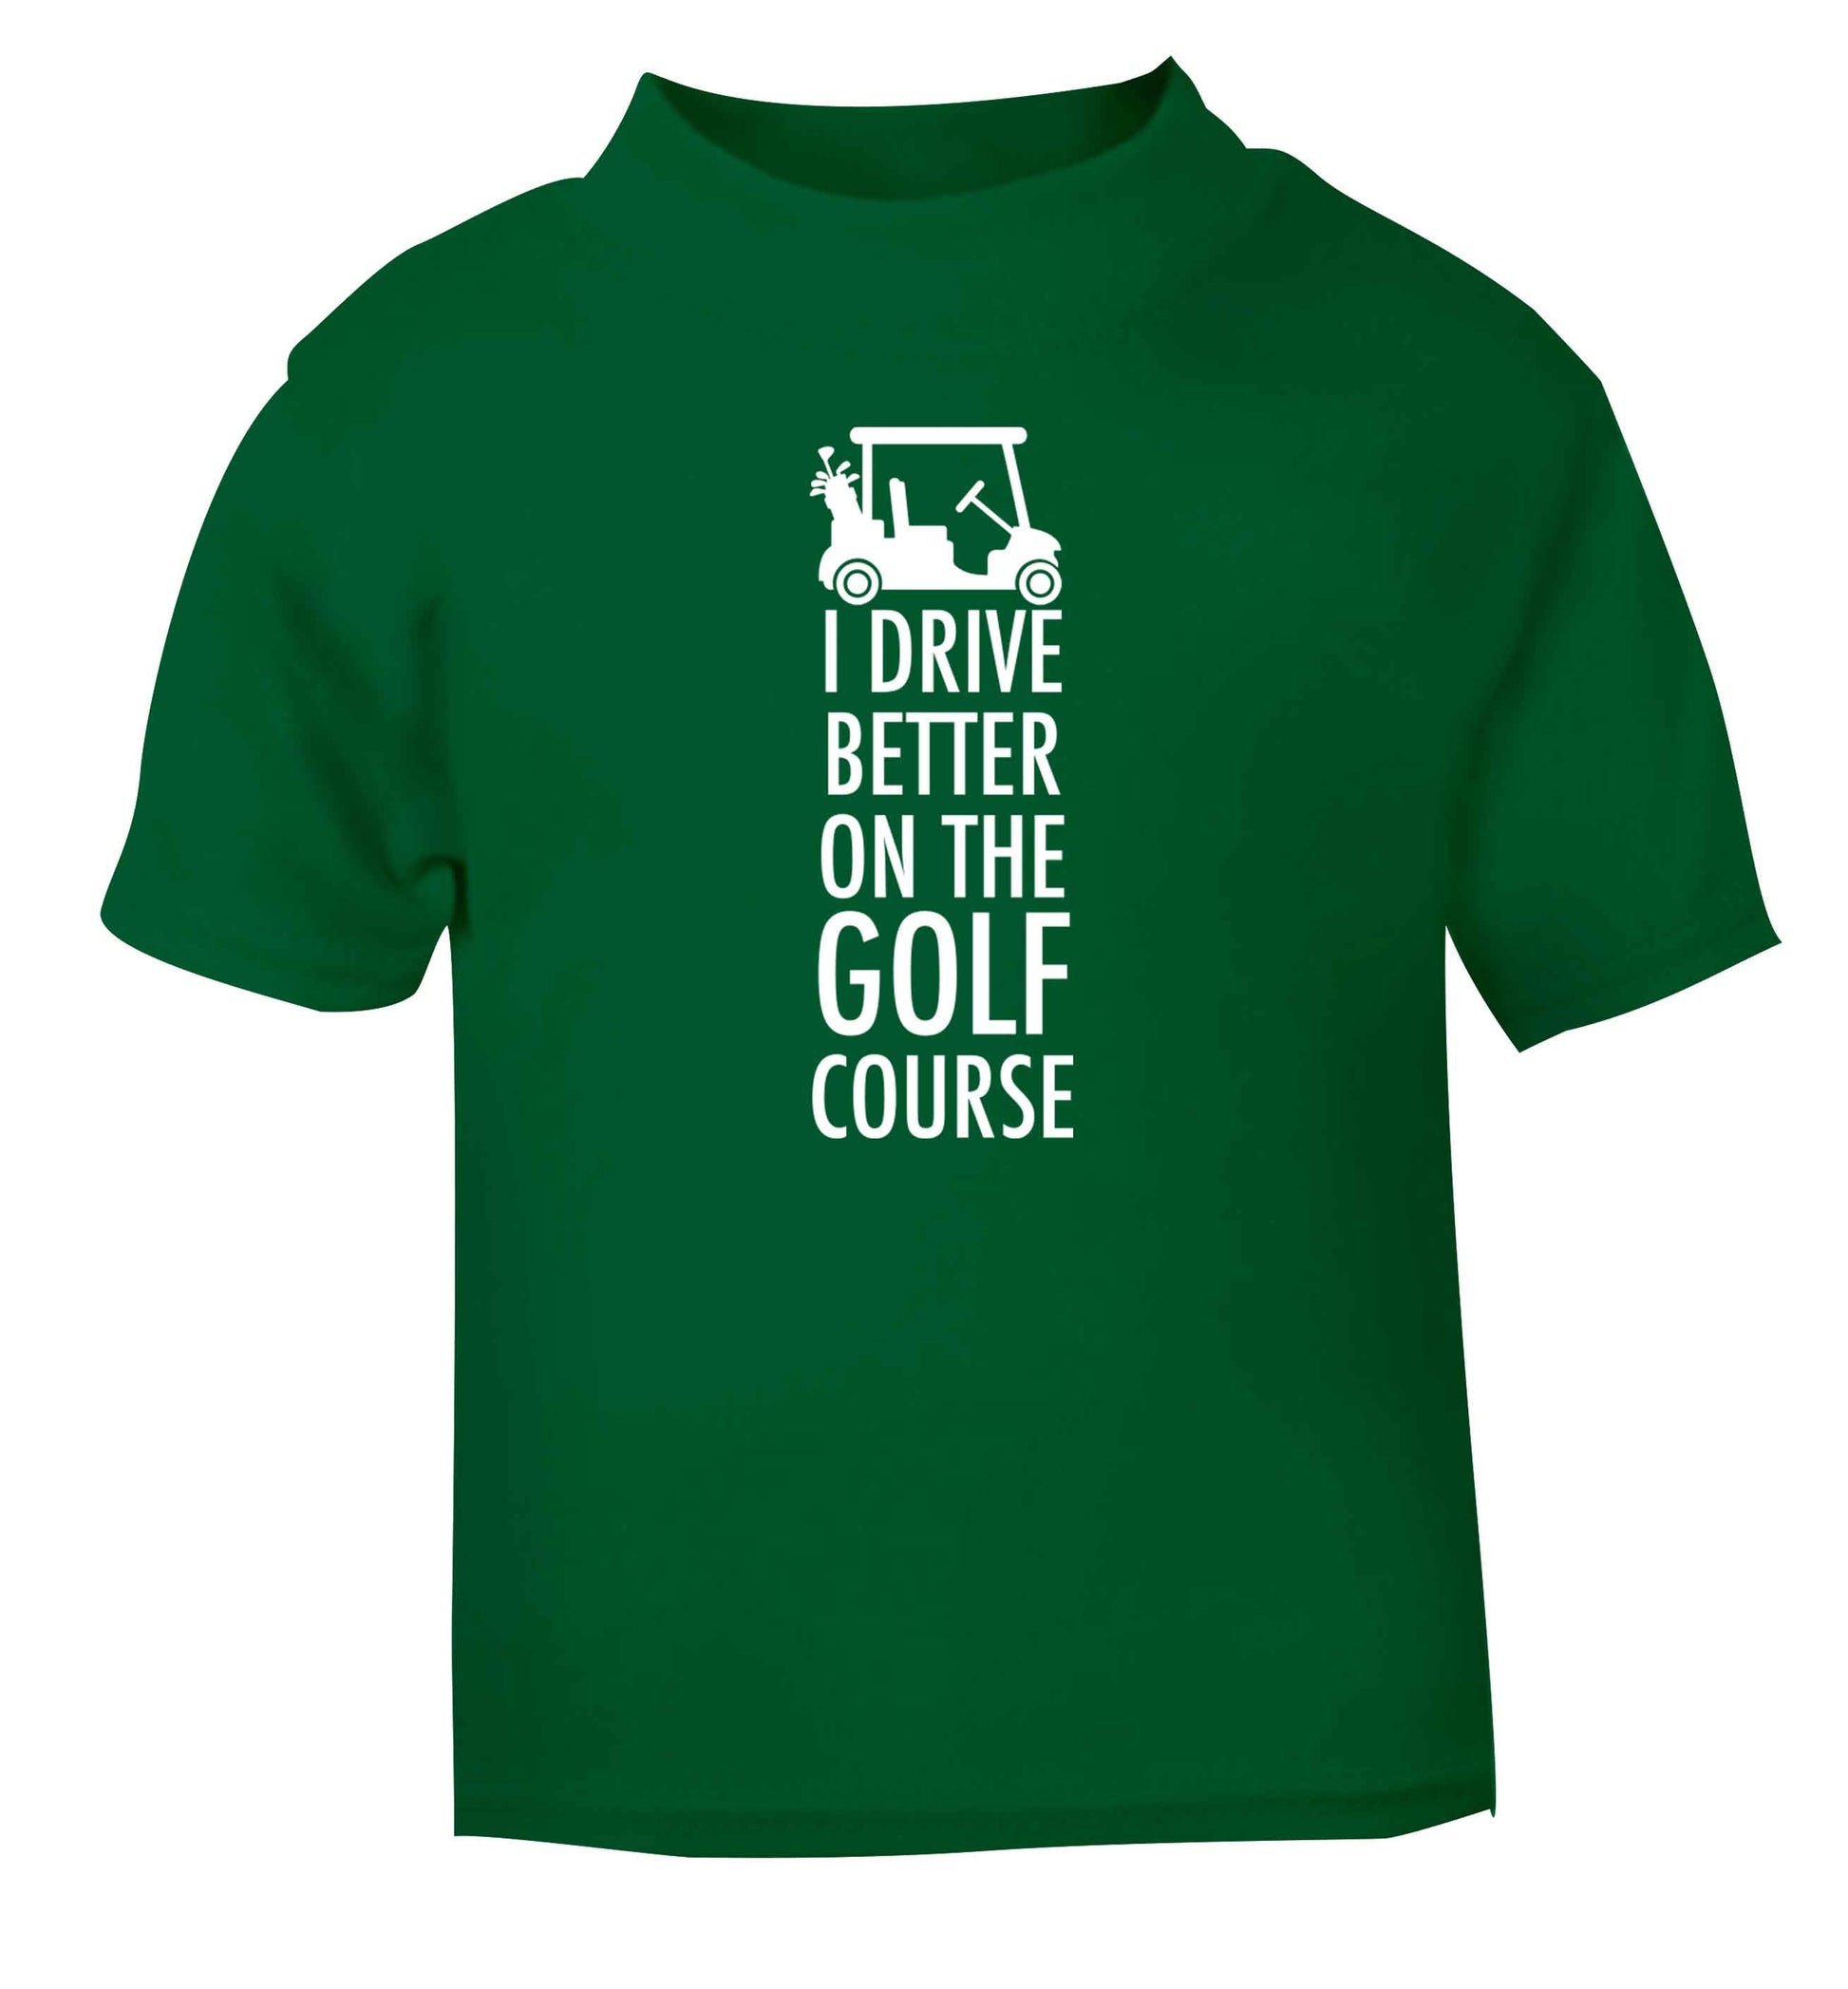 I drive better on the golf course green Baby Toddler Tshirt 2 Years